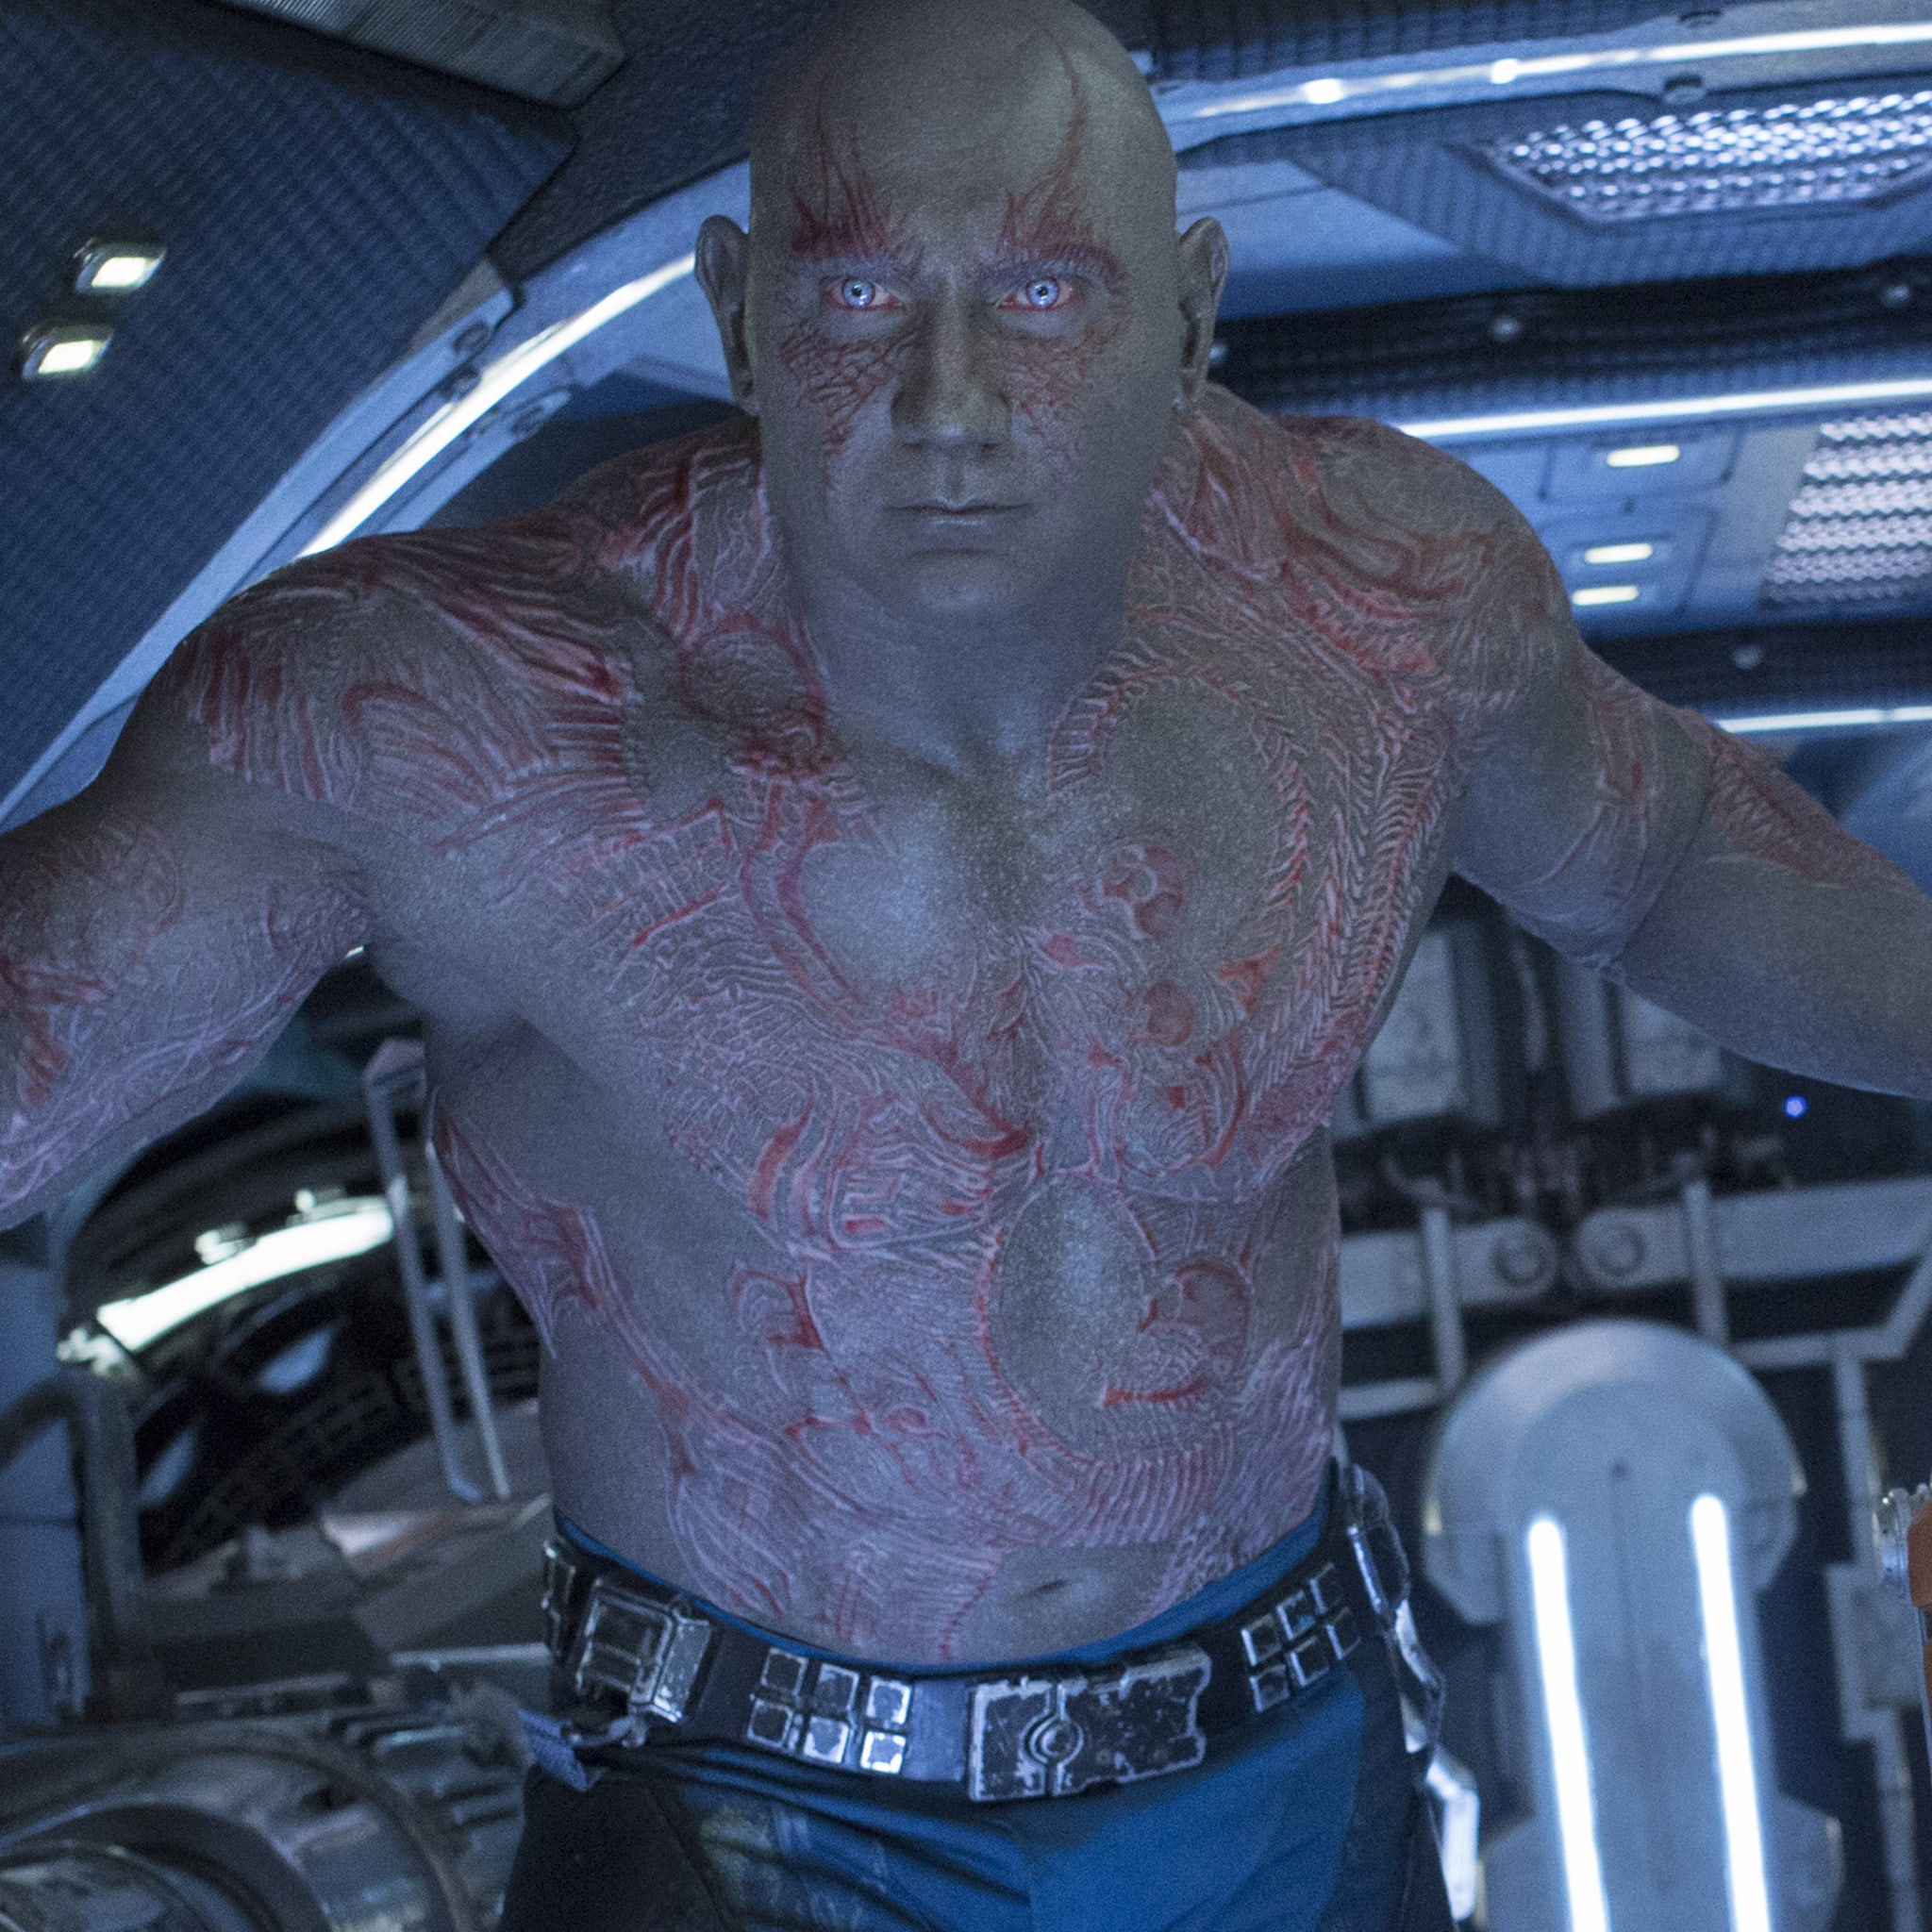 Dave Bautista might not return to 'Guardians of the Galaxy